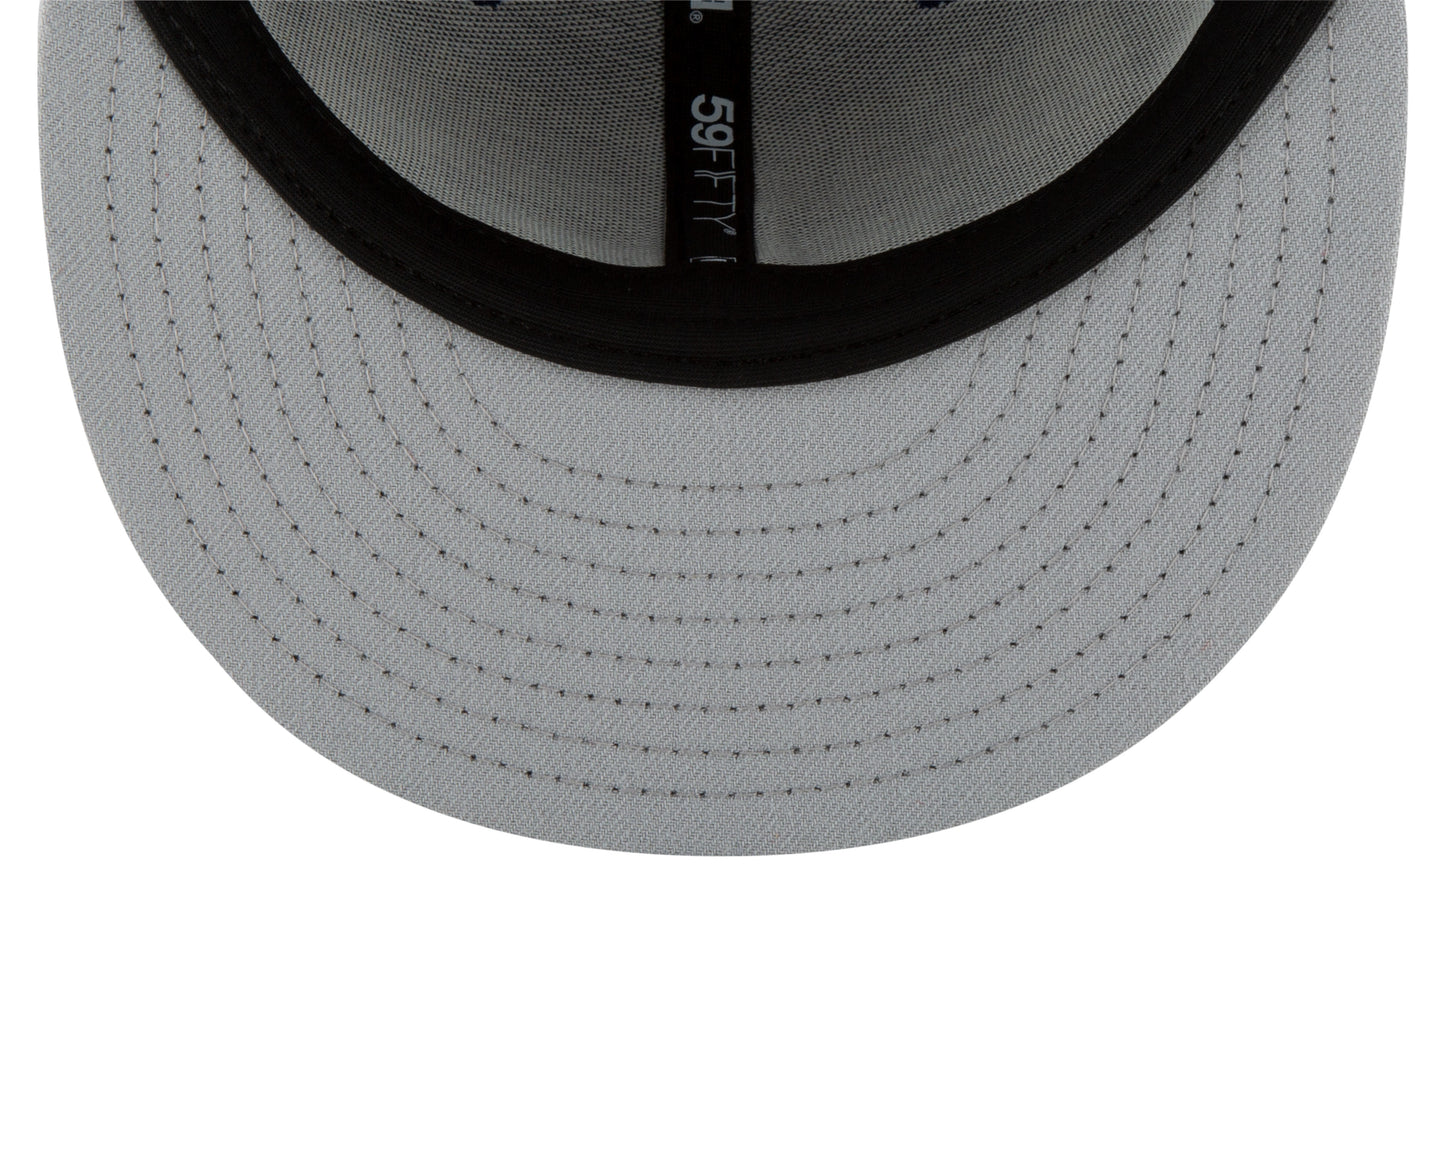 Chicago White Sox New Era OUTLINE 59Fifty Fitted MLB Hat - Black/White